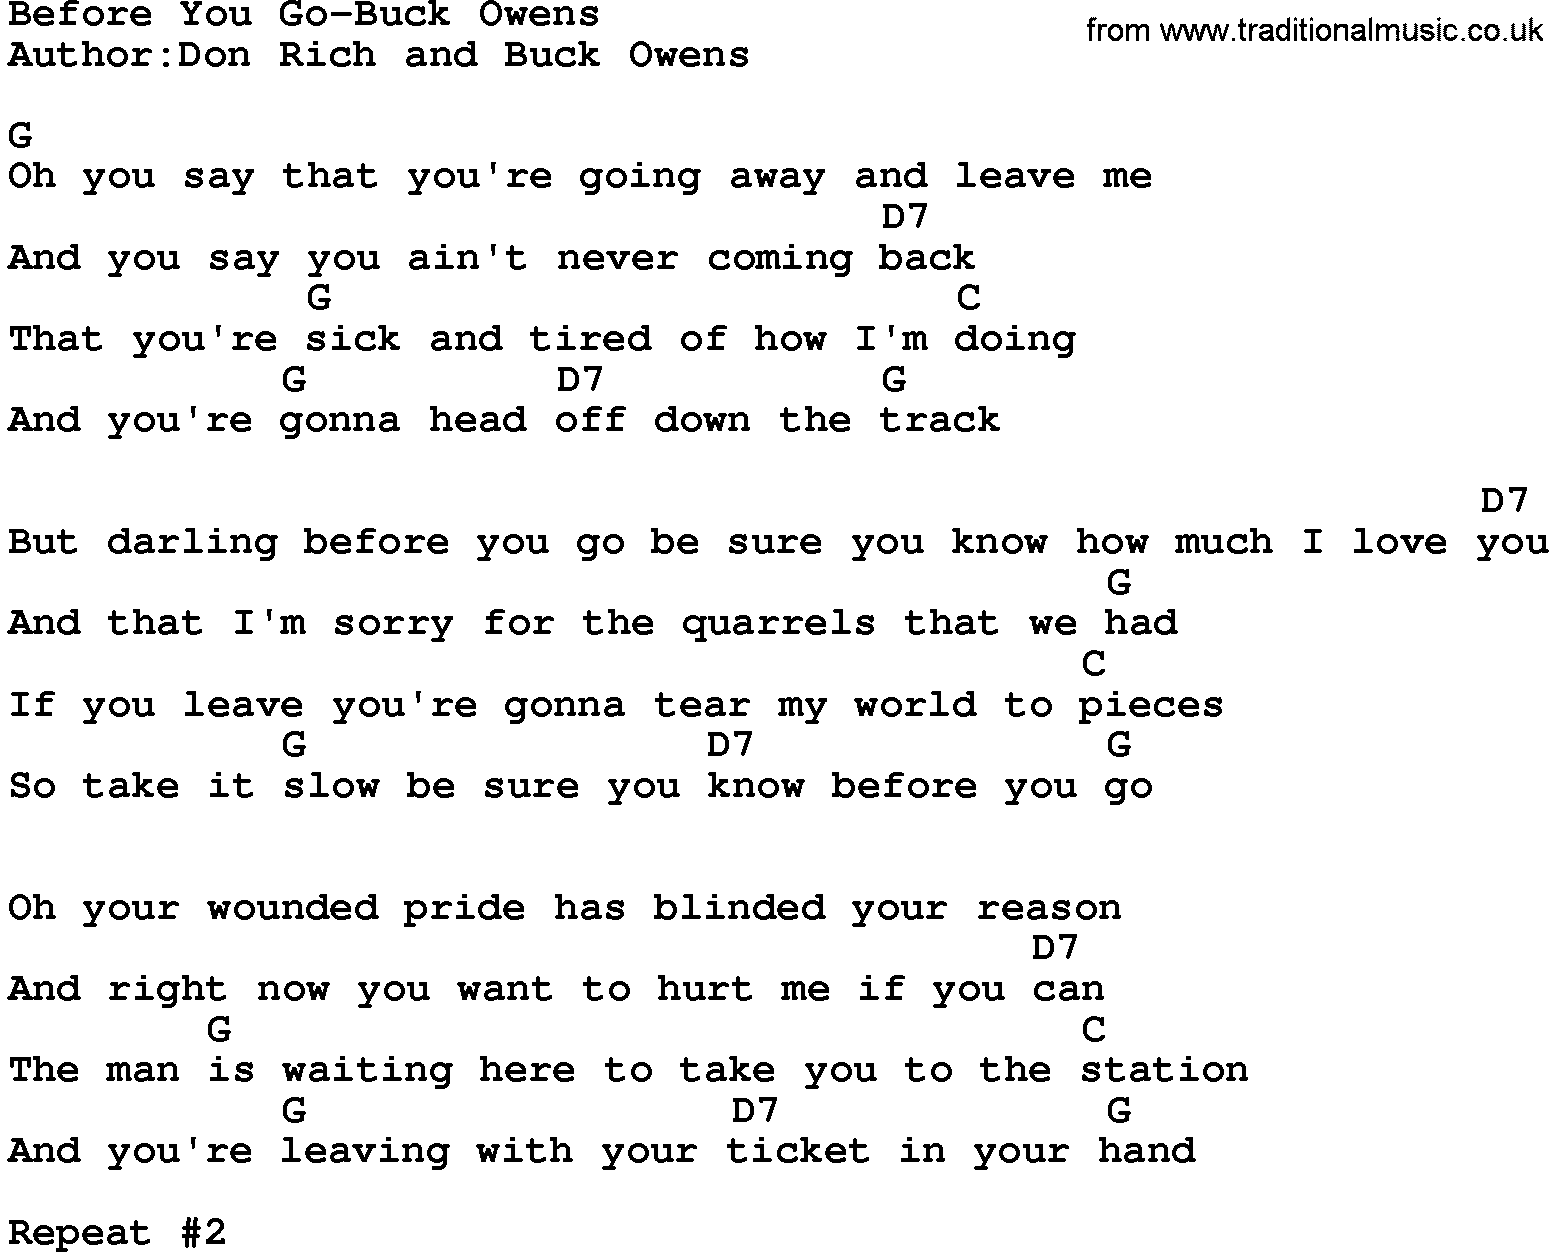 Country music song: Before You Go-Buck Owens lyrics and chords